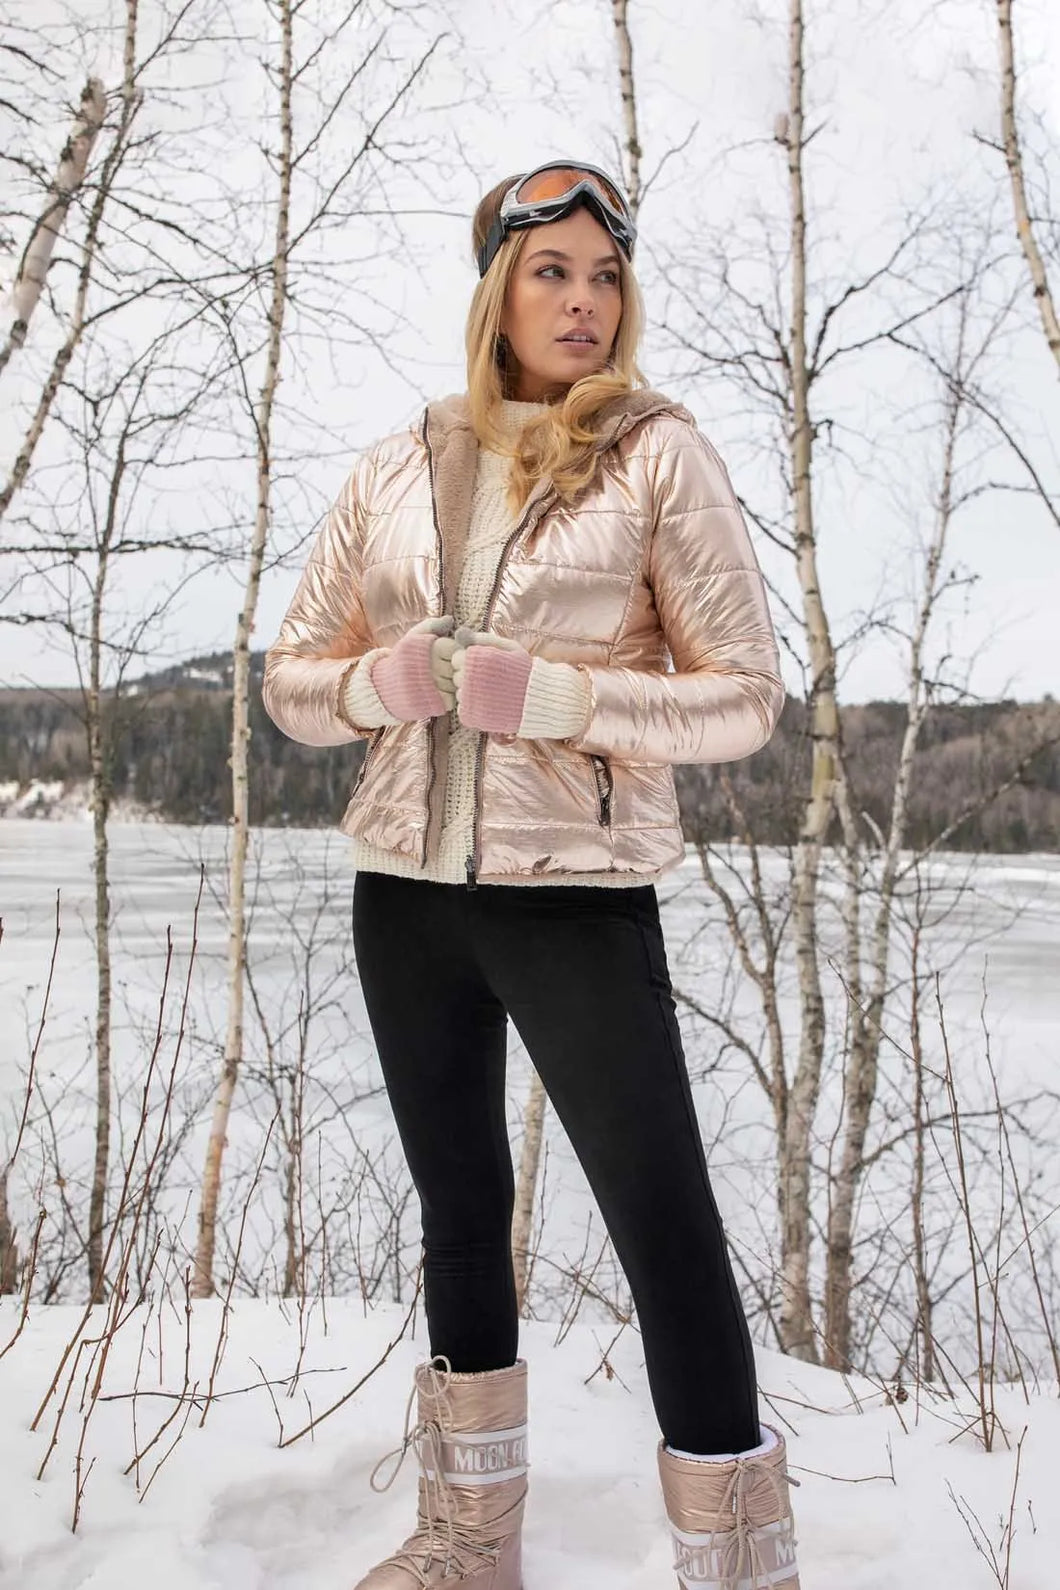 Fashion choices can be tough, but this jacket lets you have it all. We love this versatile puffer thanks to its classic zippered front, cozy hood, zippered front pockets, and soft polyfill inner, but the real treat is the reversible metallic shell that lets you choose your own style adventure and create a look that's uniquely yours.  Color- Metallic champagne. Zip front with hood. Relaxed fit. Reversible. Front zippered pockets.